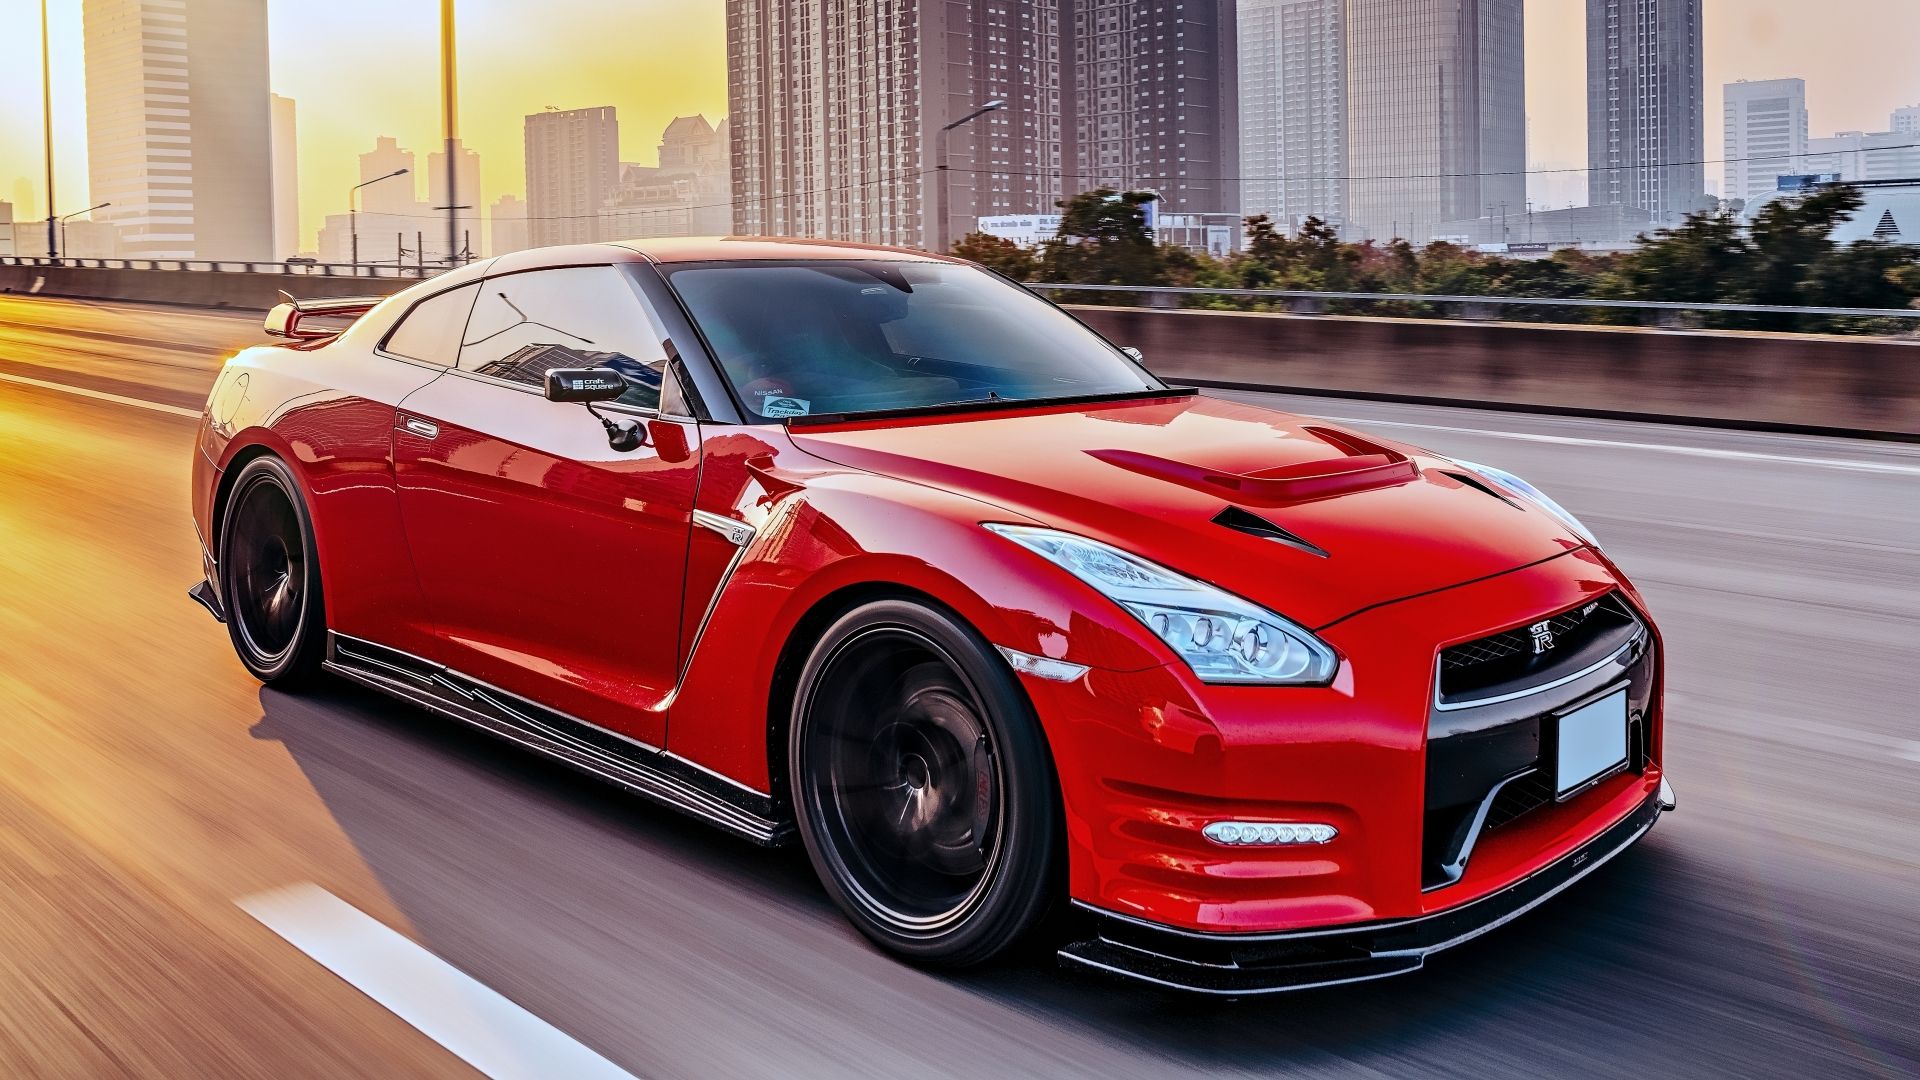 What is the possibility of Nissan building a 4-door version of the GT-R? -  Quora